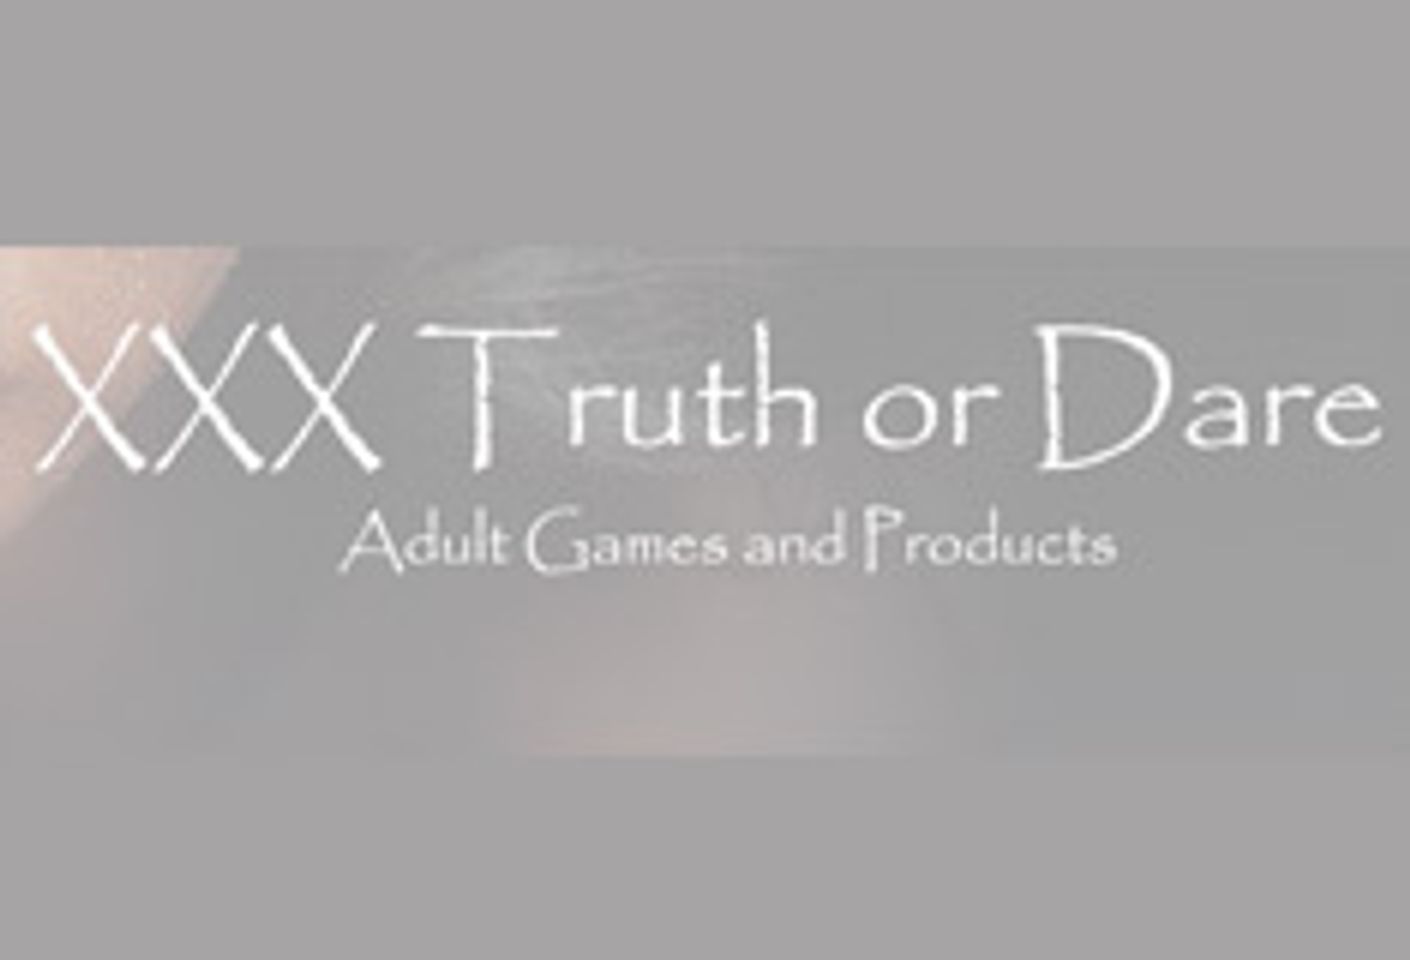 XXX Truth or Dare Announces Duo Cards Now On Sale